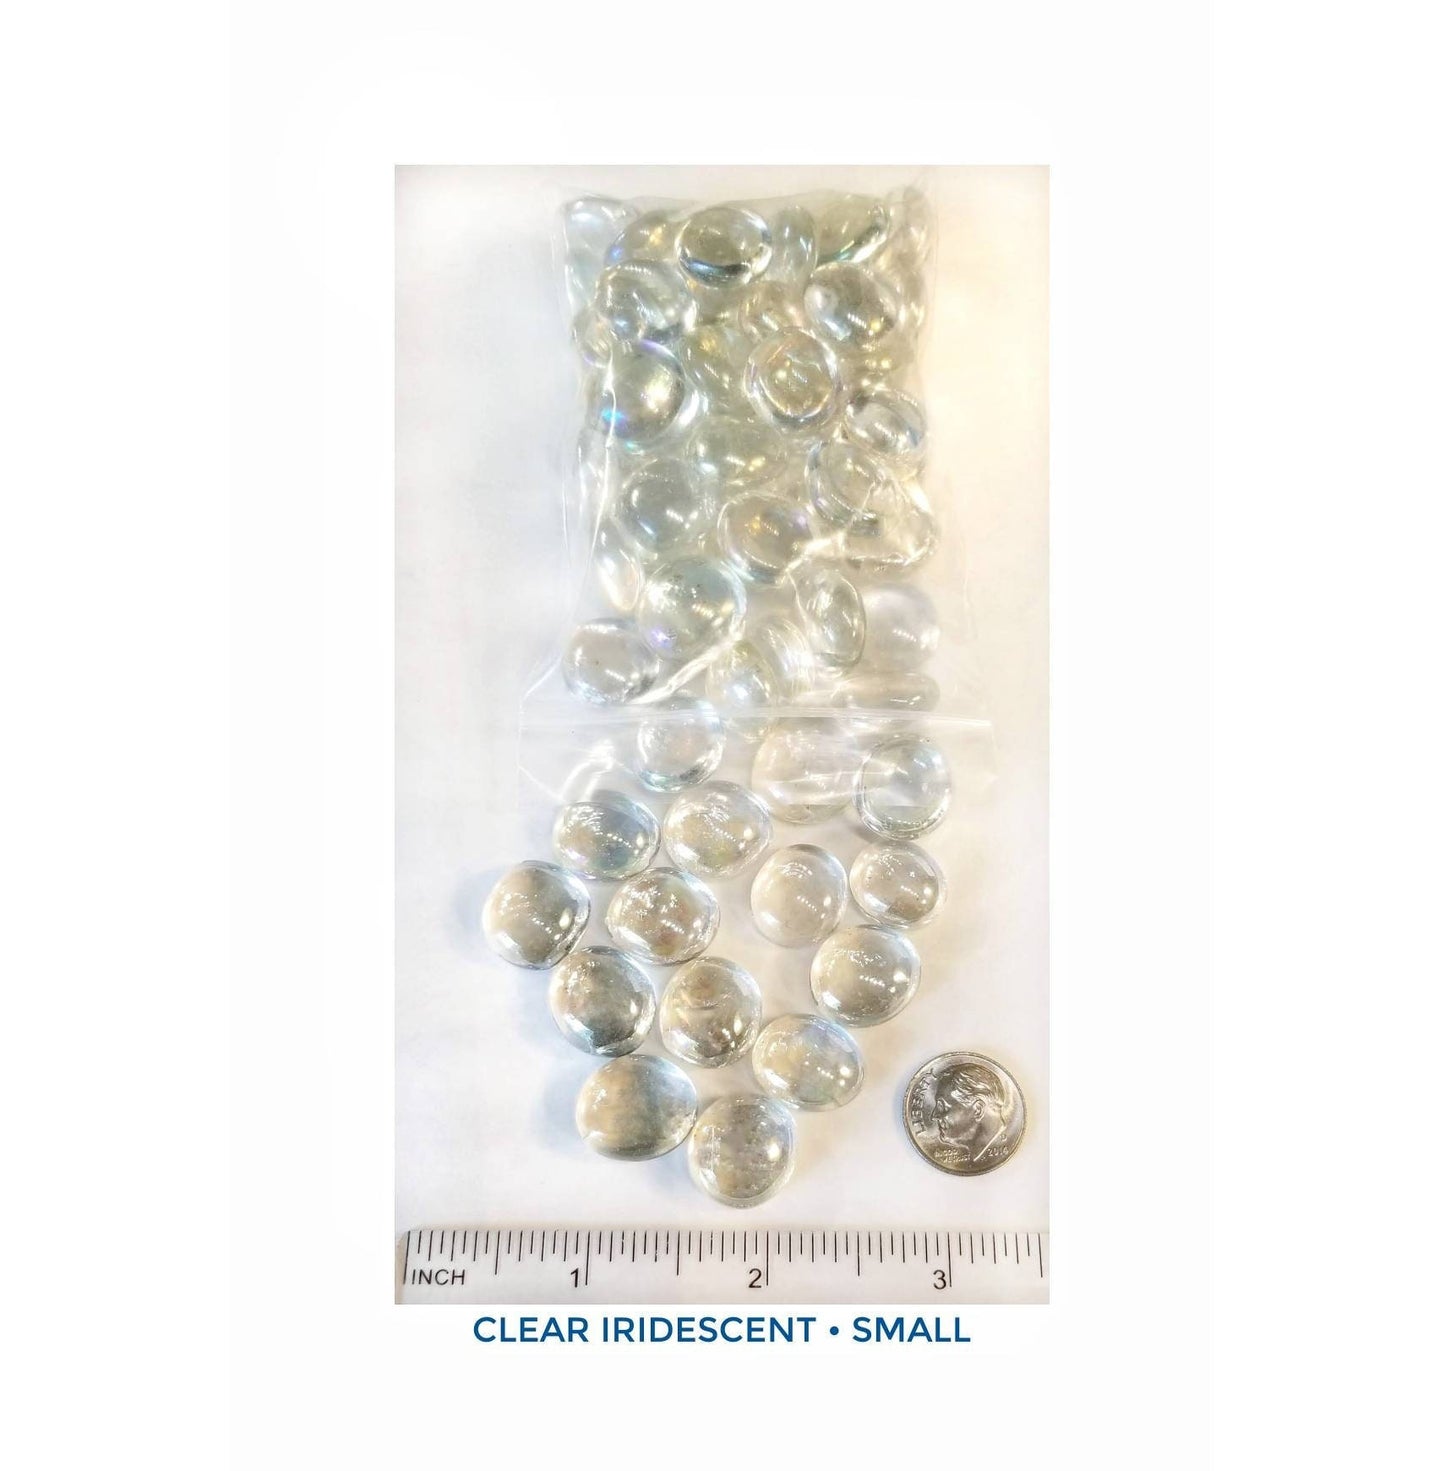 Iridized Clear Glass Nuggets for Stained Glass. Steppingstones, Jewelry Making Supply, Teen Craft Projects. Vintage Small Gems as pictured.